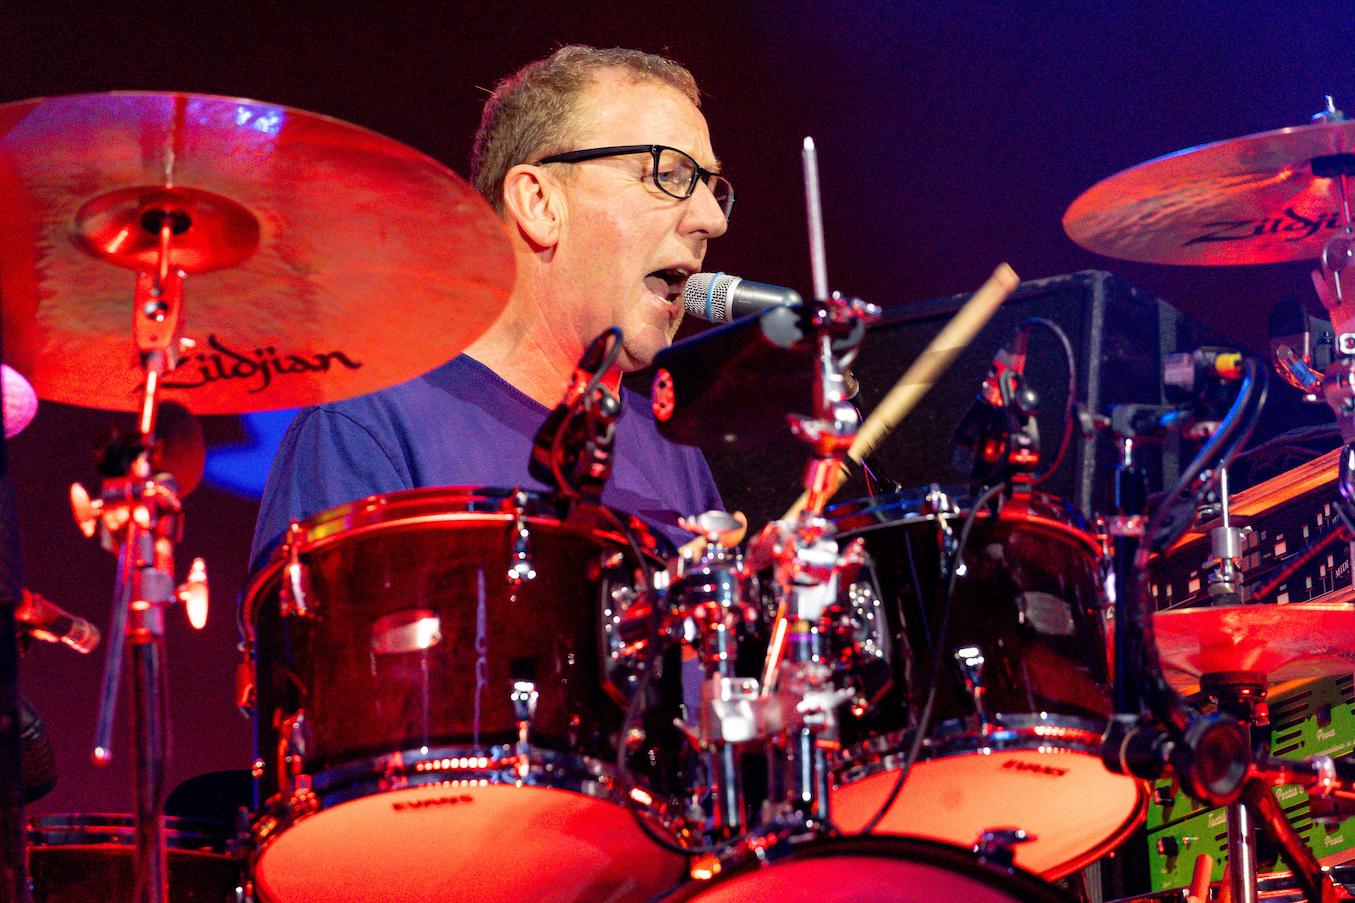 Will Blur drummer Dave Rowntree win for Labour in Mid Sussex? - Politics.co.uk